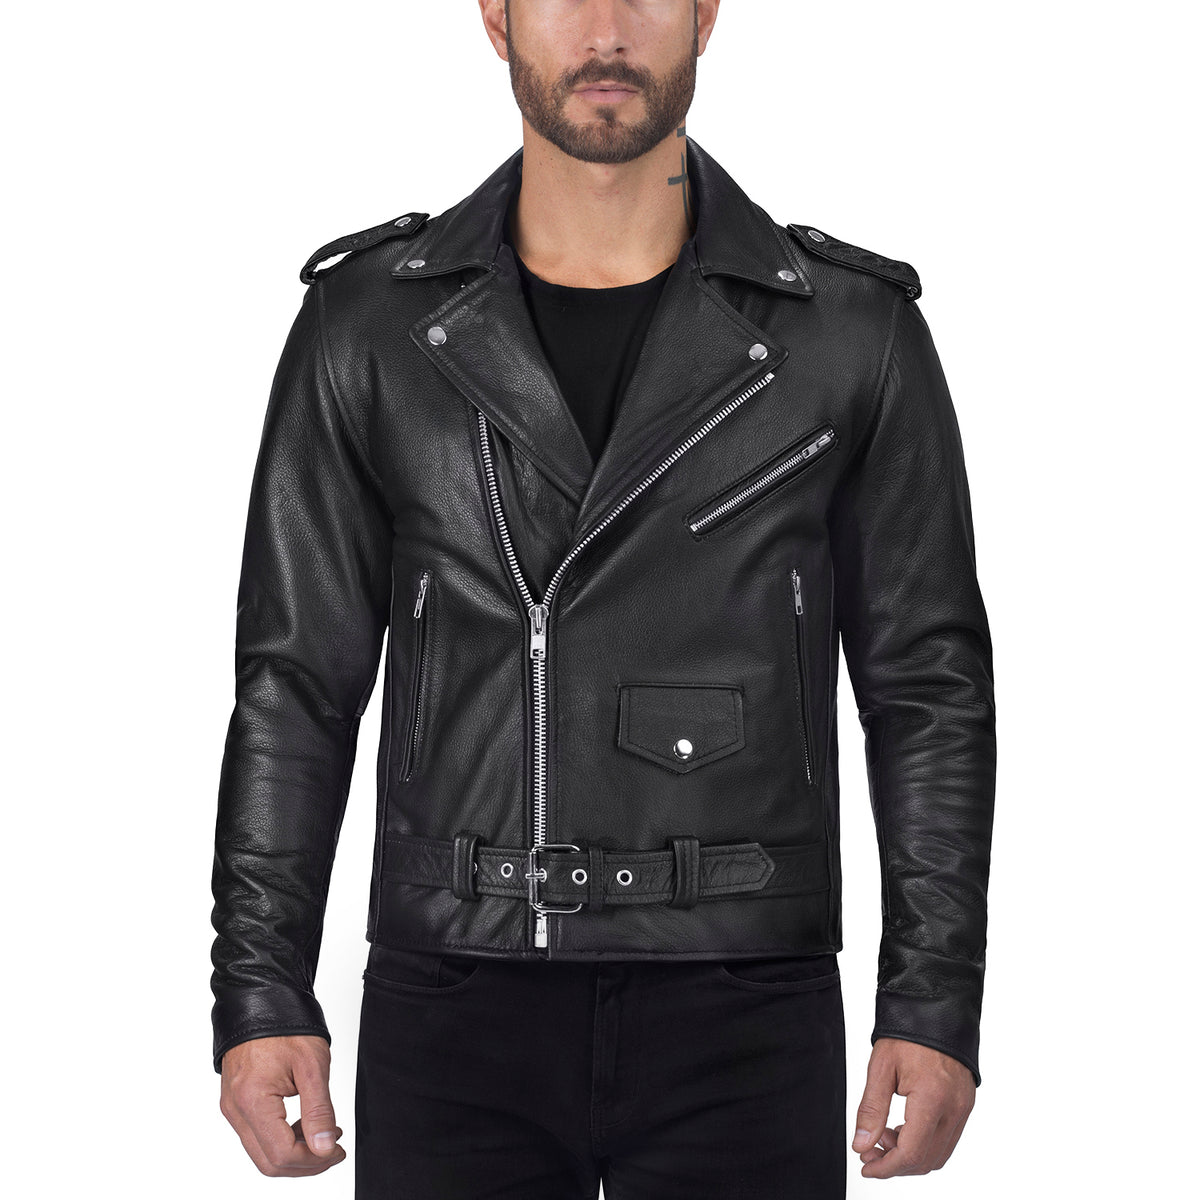 American Eagle Leather Jacket for Men - Viking Cycle